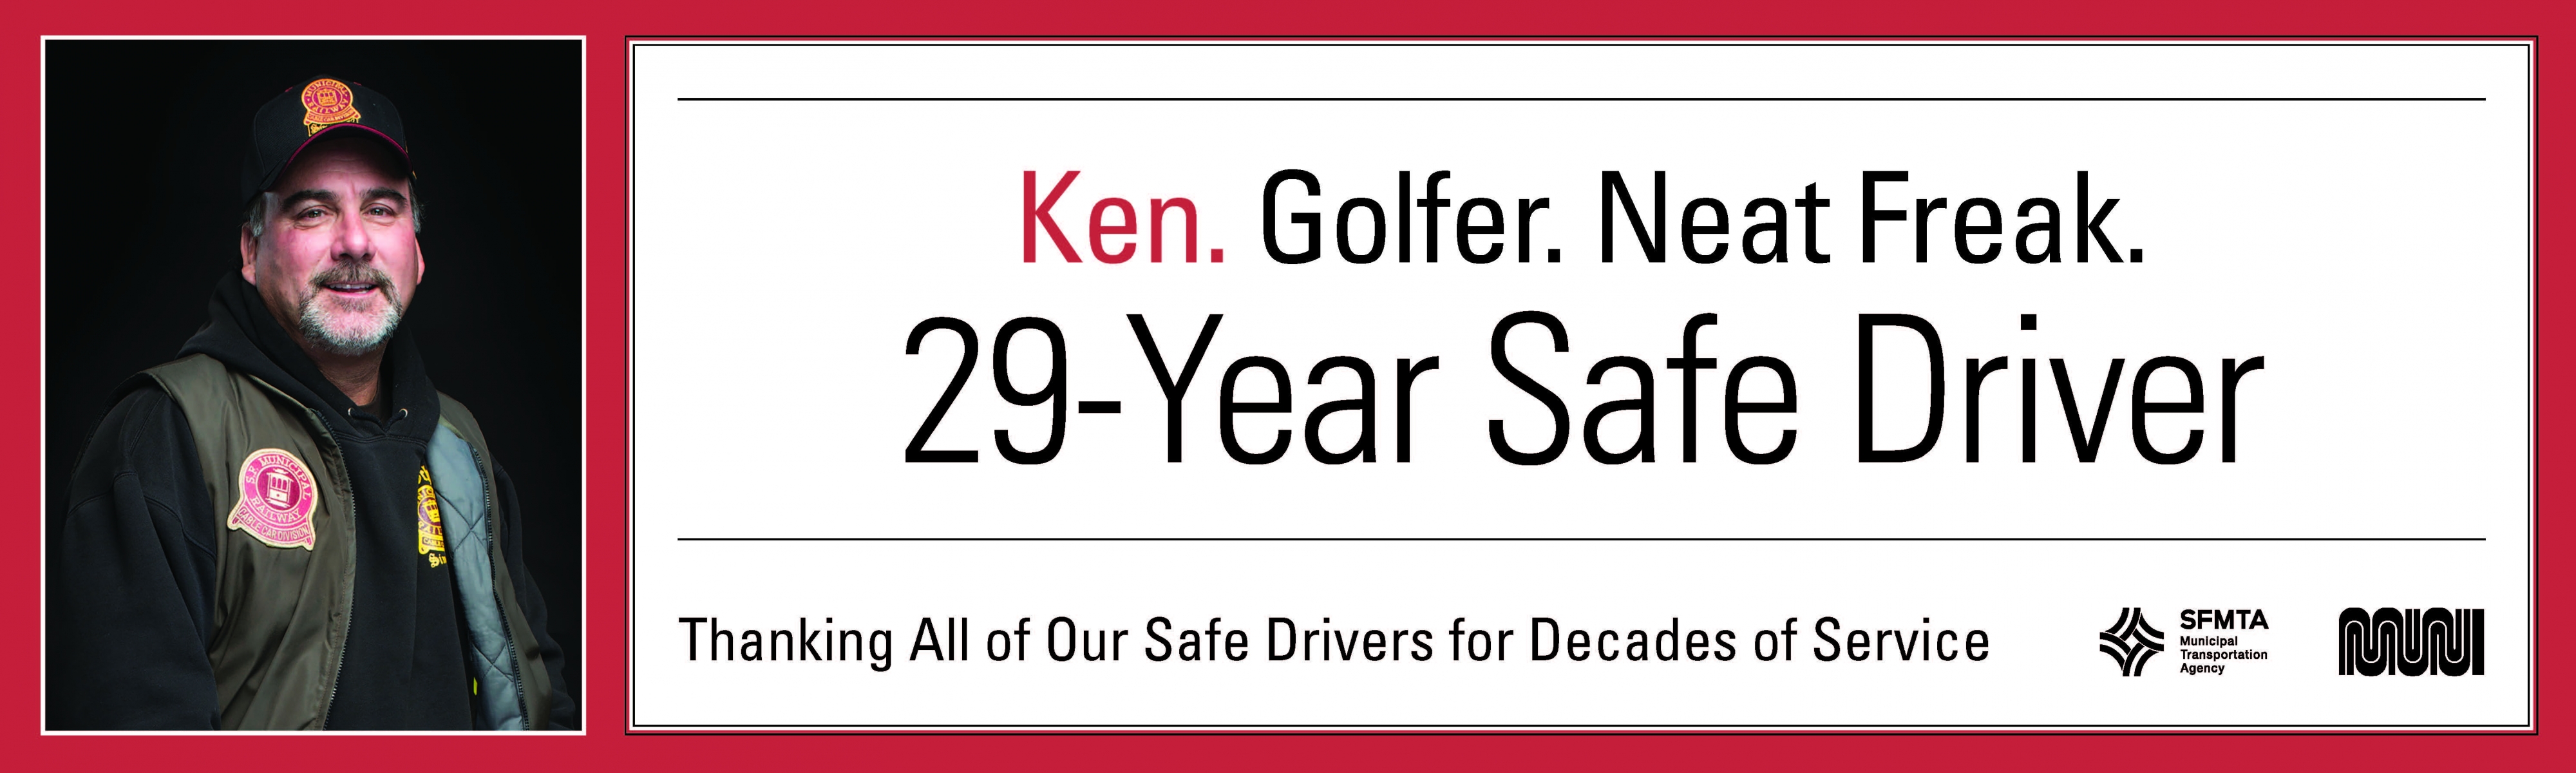 Safe driver ad featuring Ken